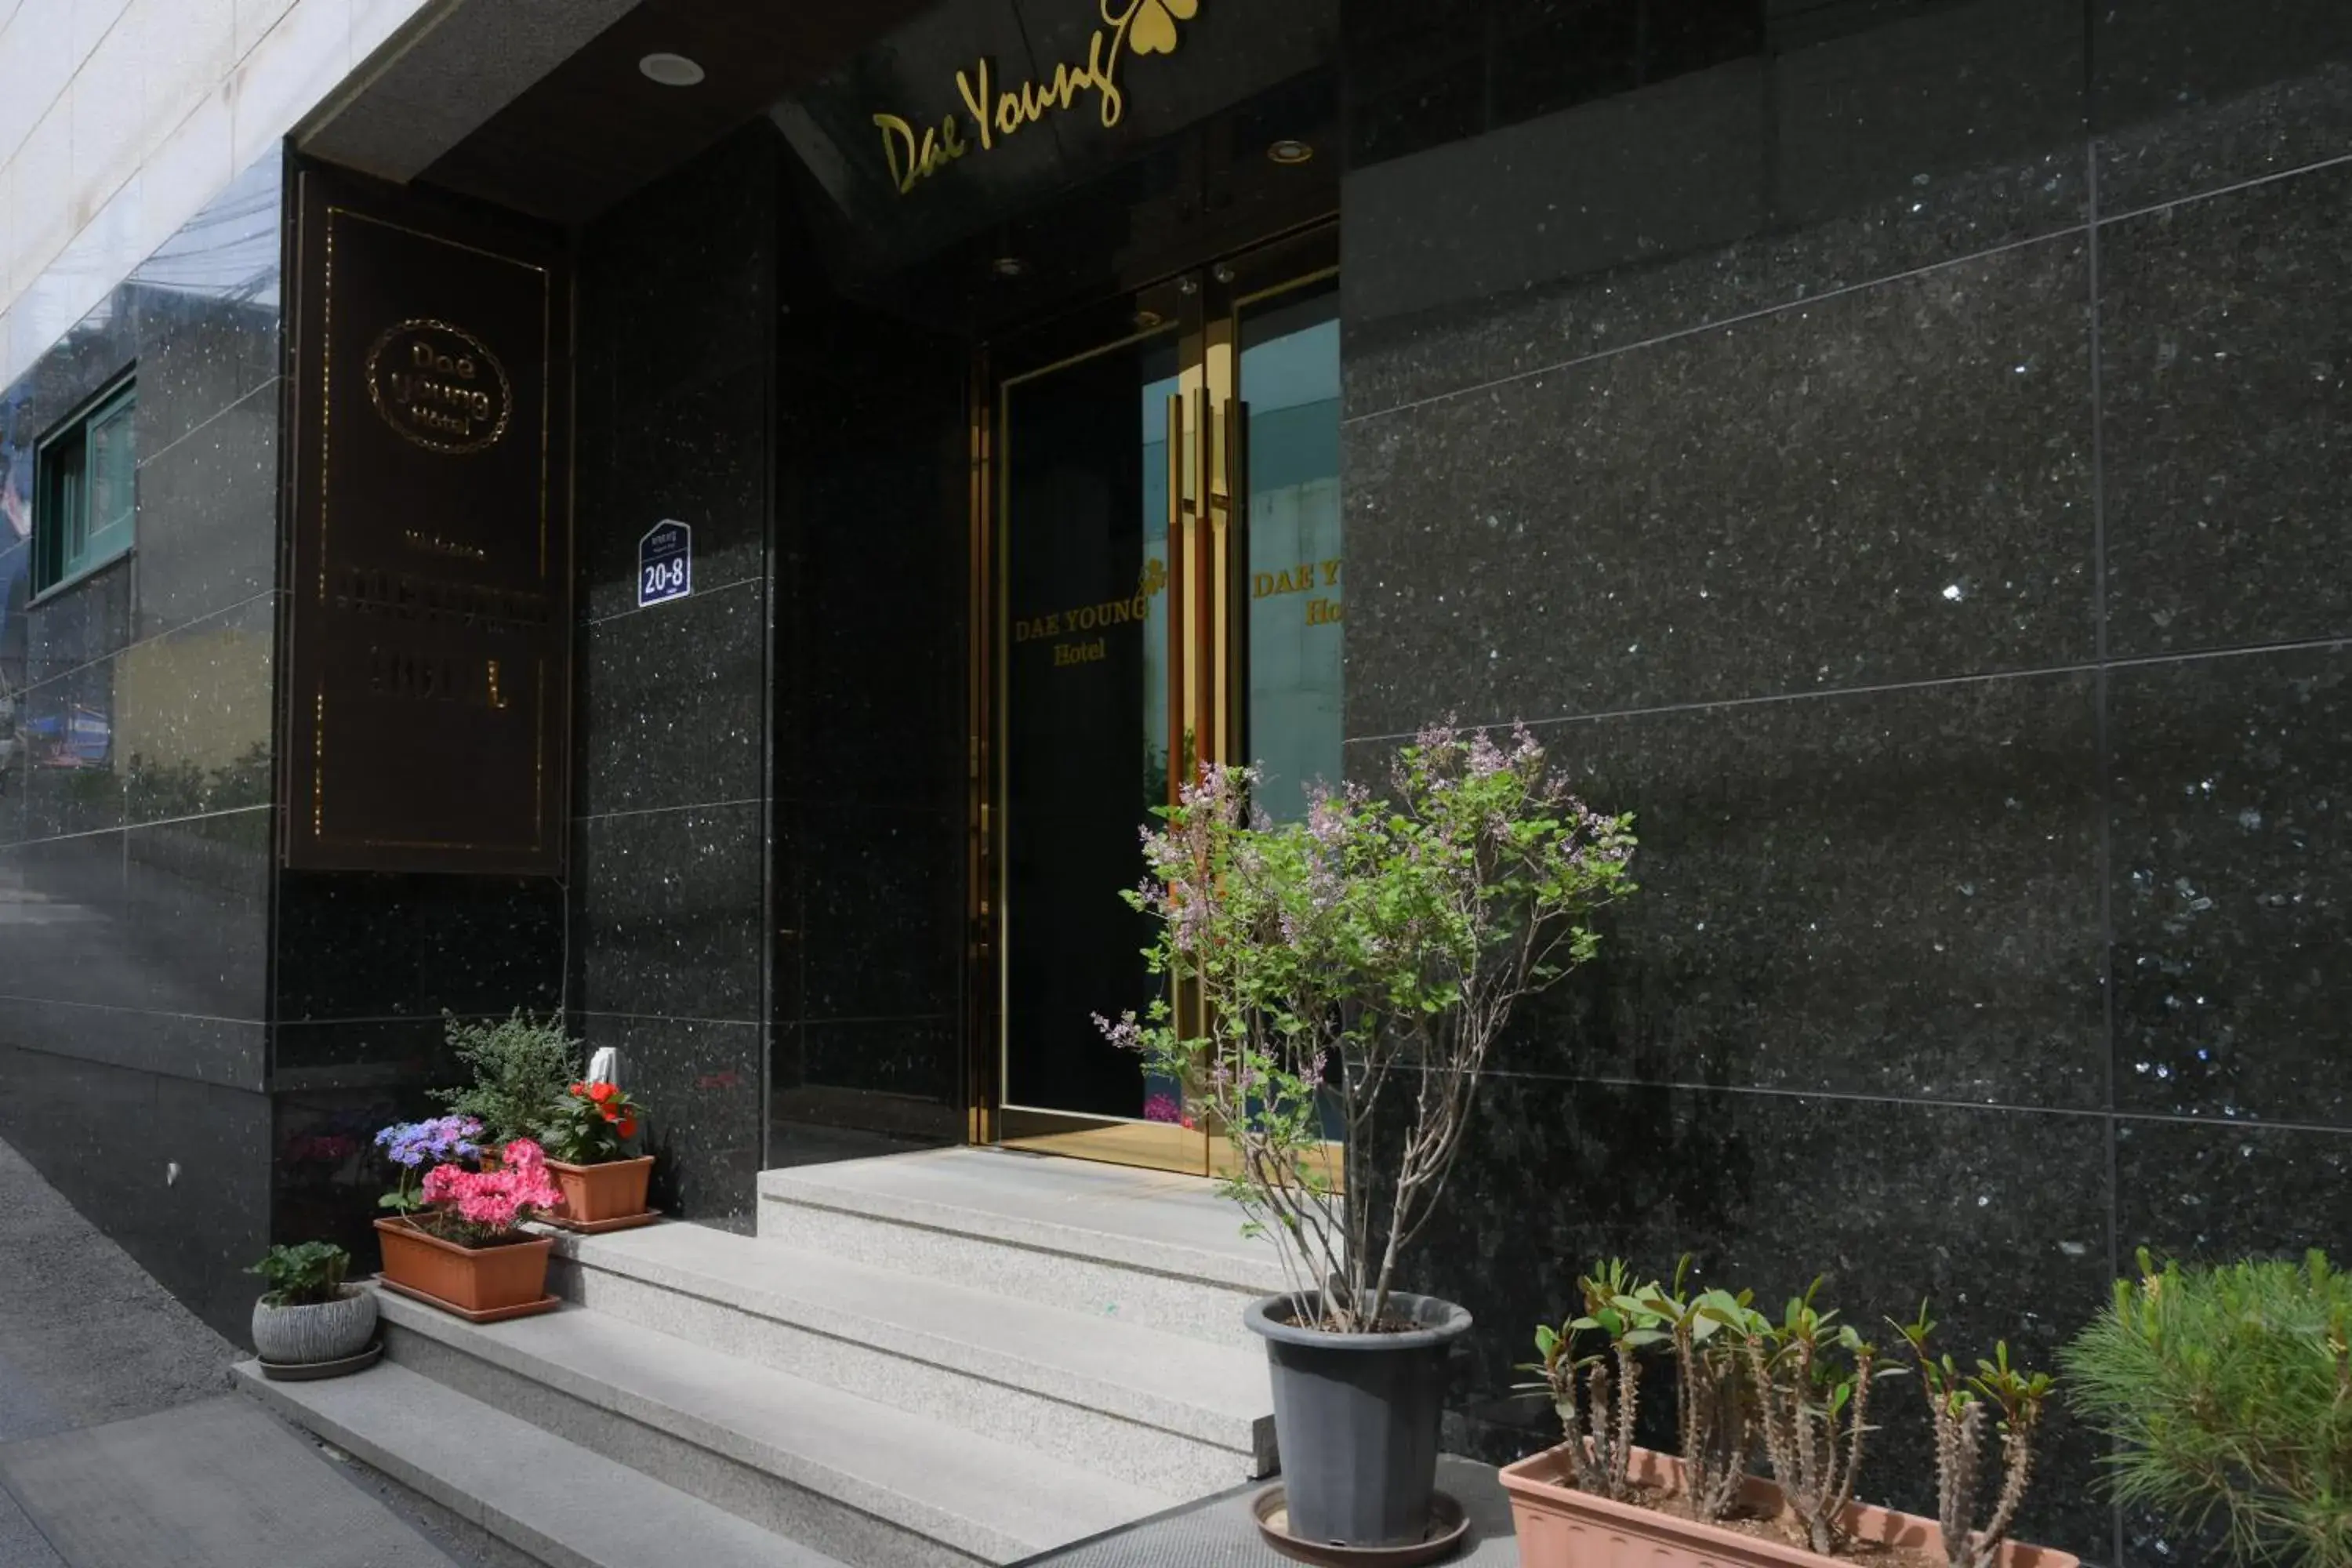 Property building in Daeyoung Hotel Myeongdong